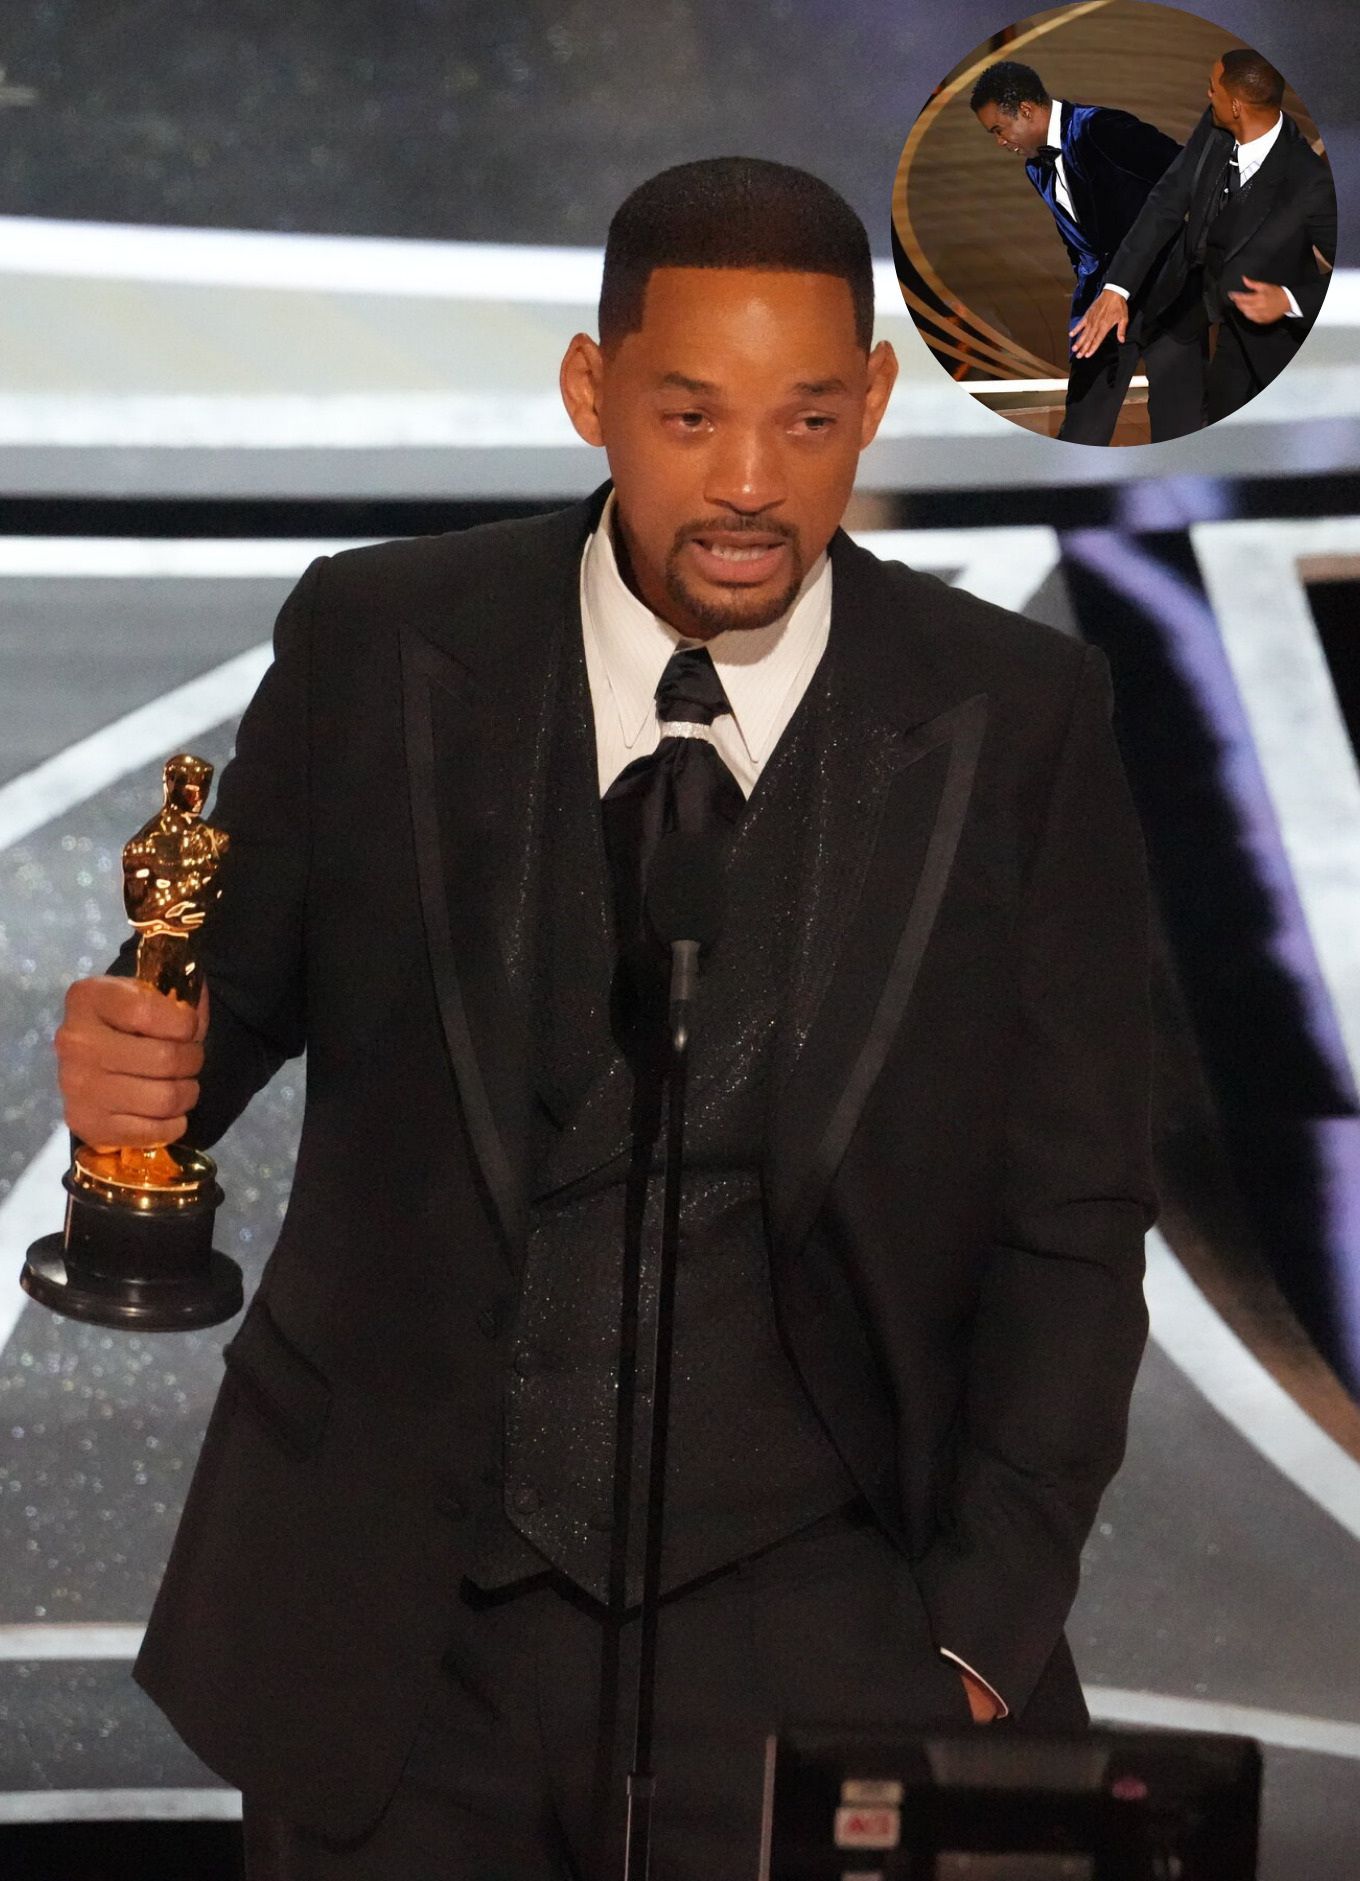 Will Smith stands on stage and accepts his first academy award